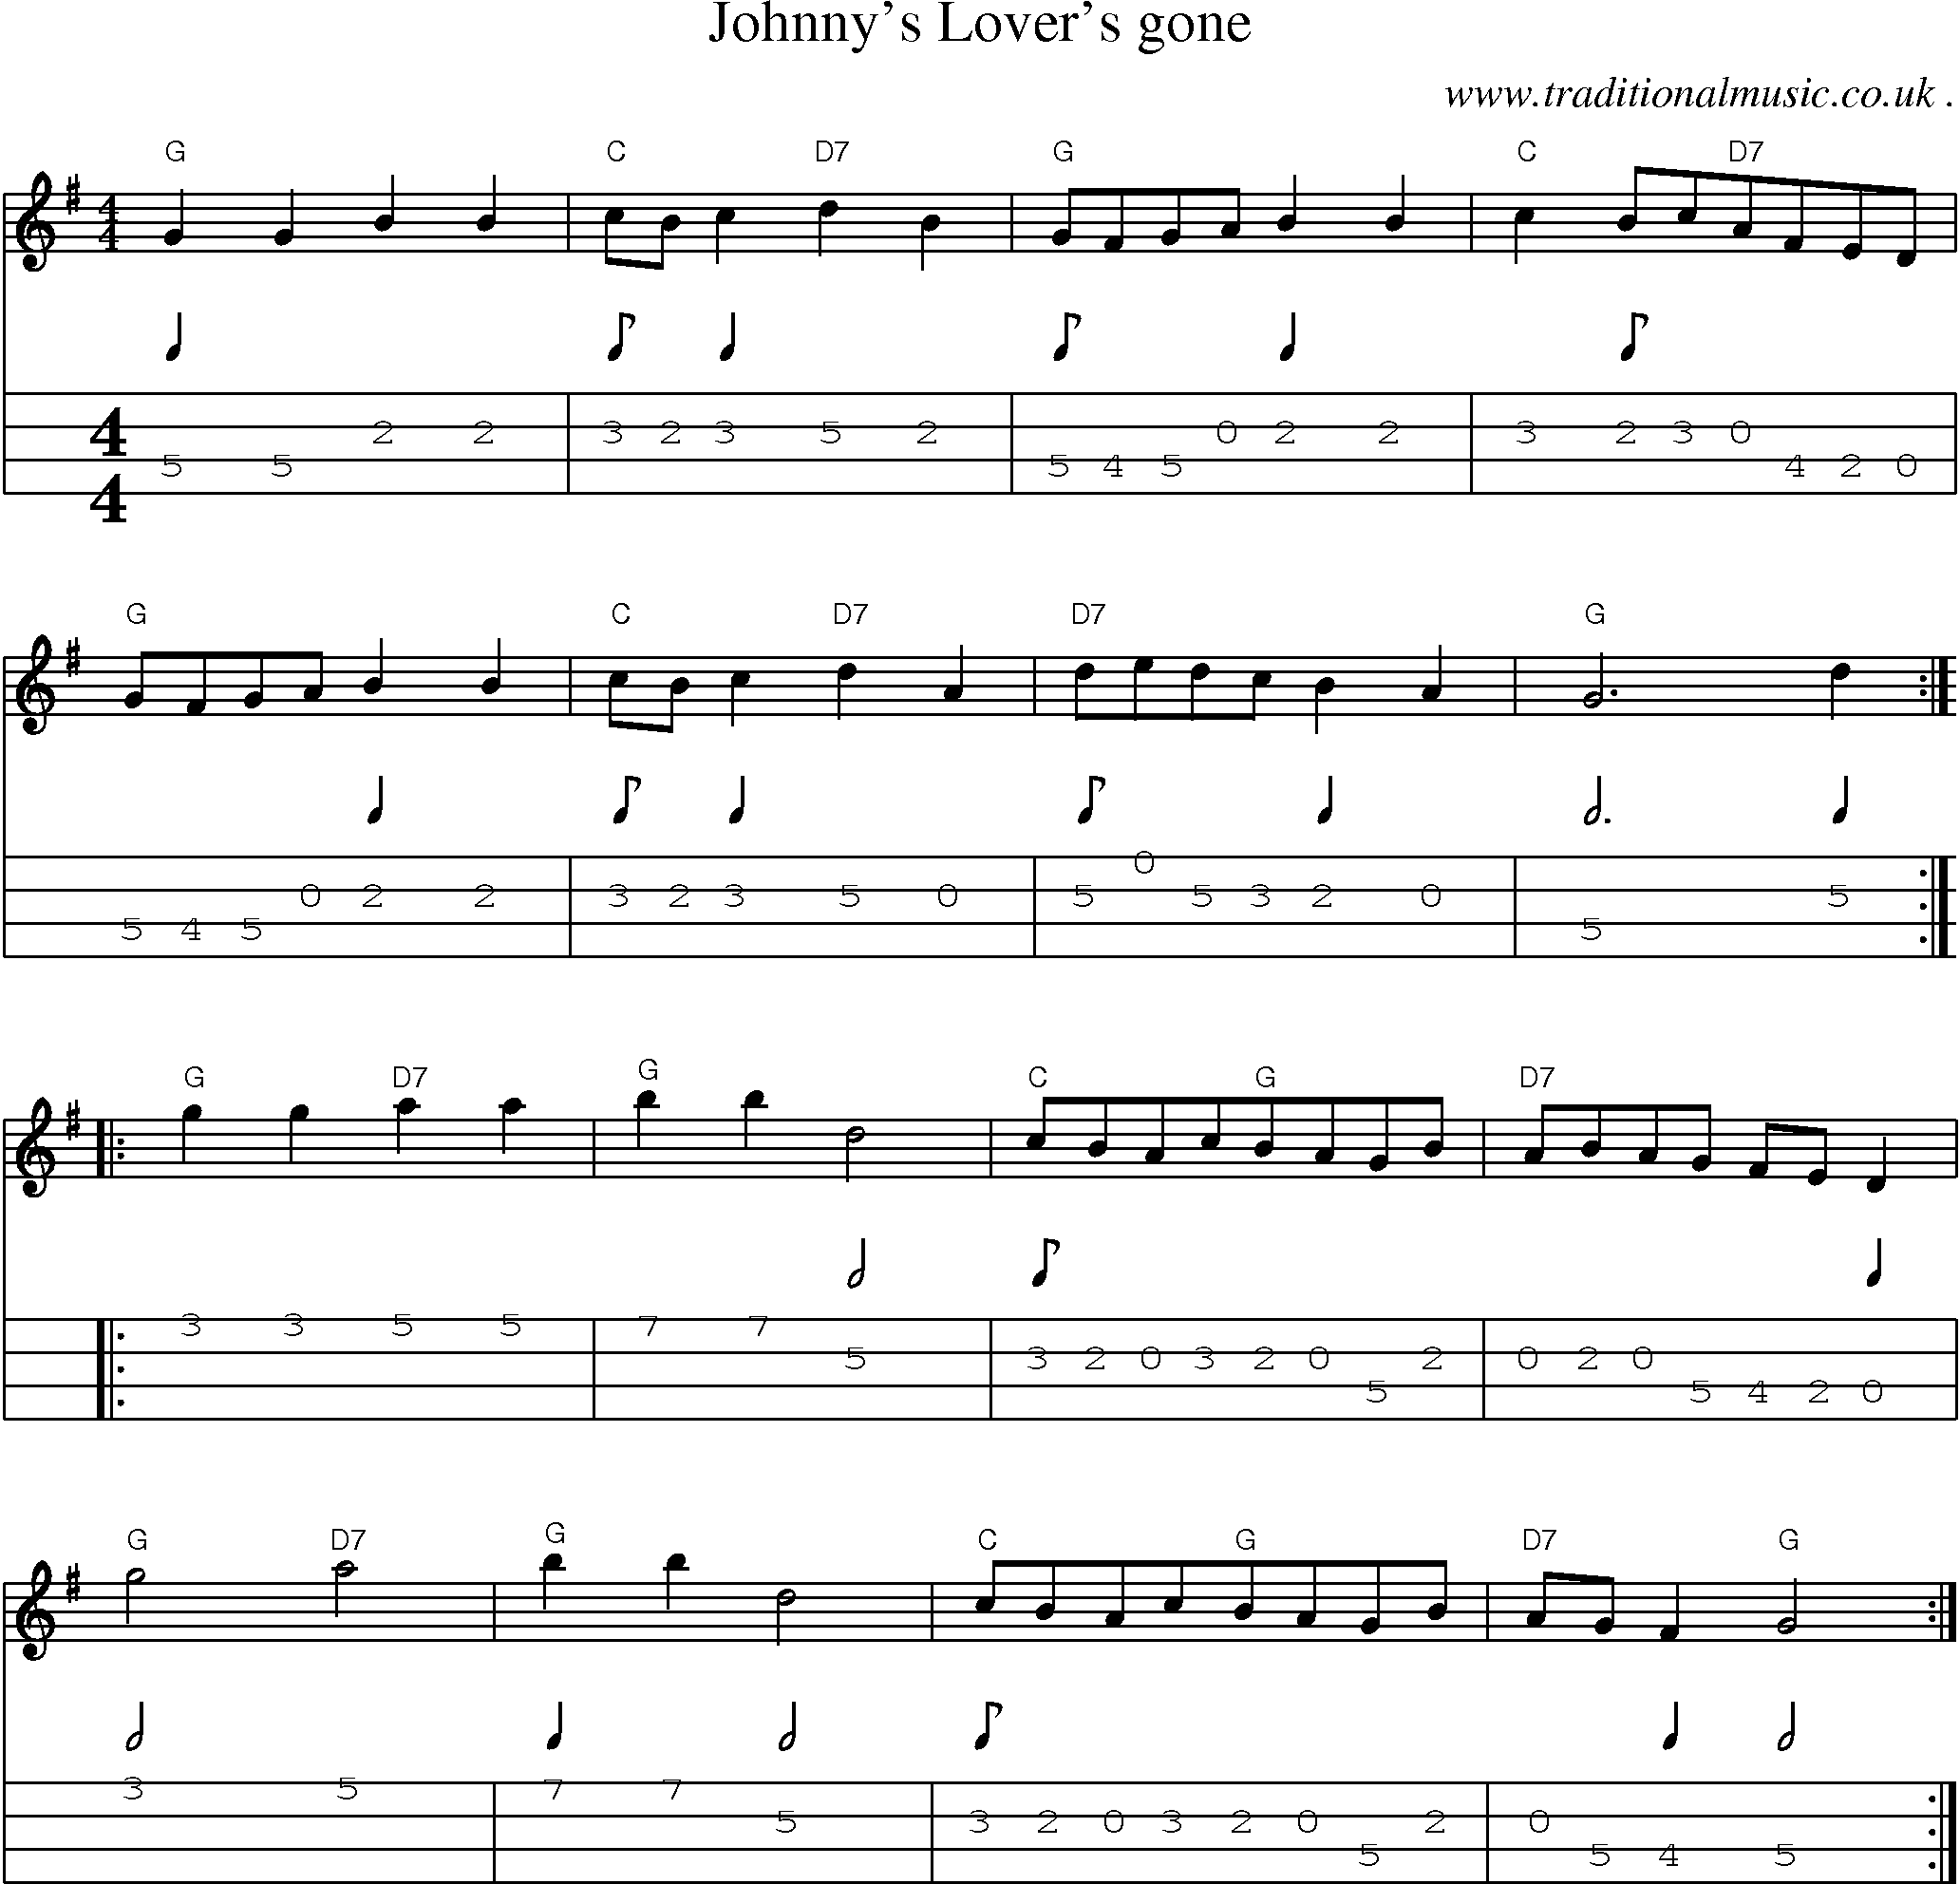 Sheet-Music and Mandolin Tabs for Johnnys Lovers Gone